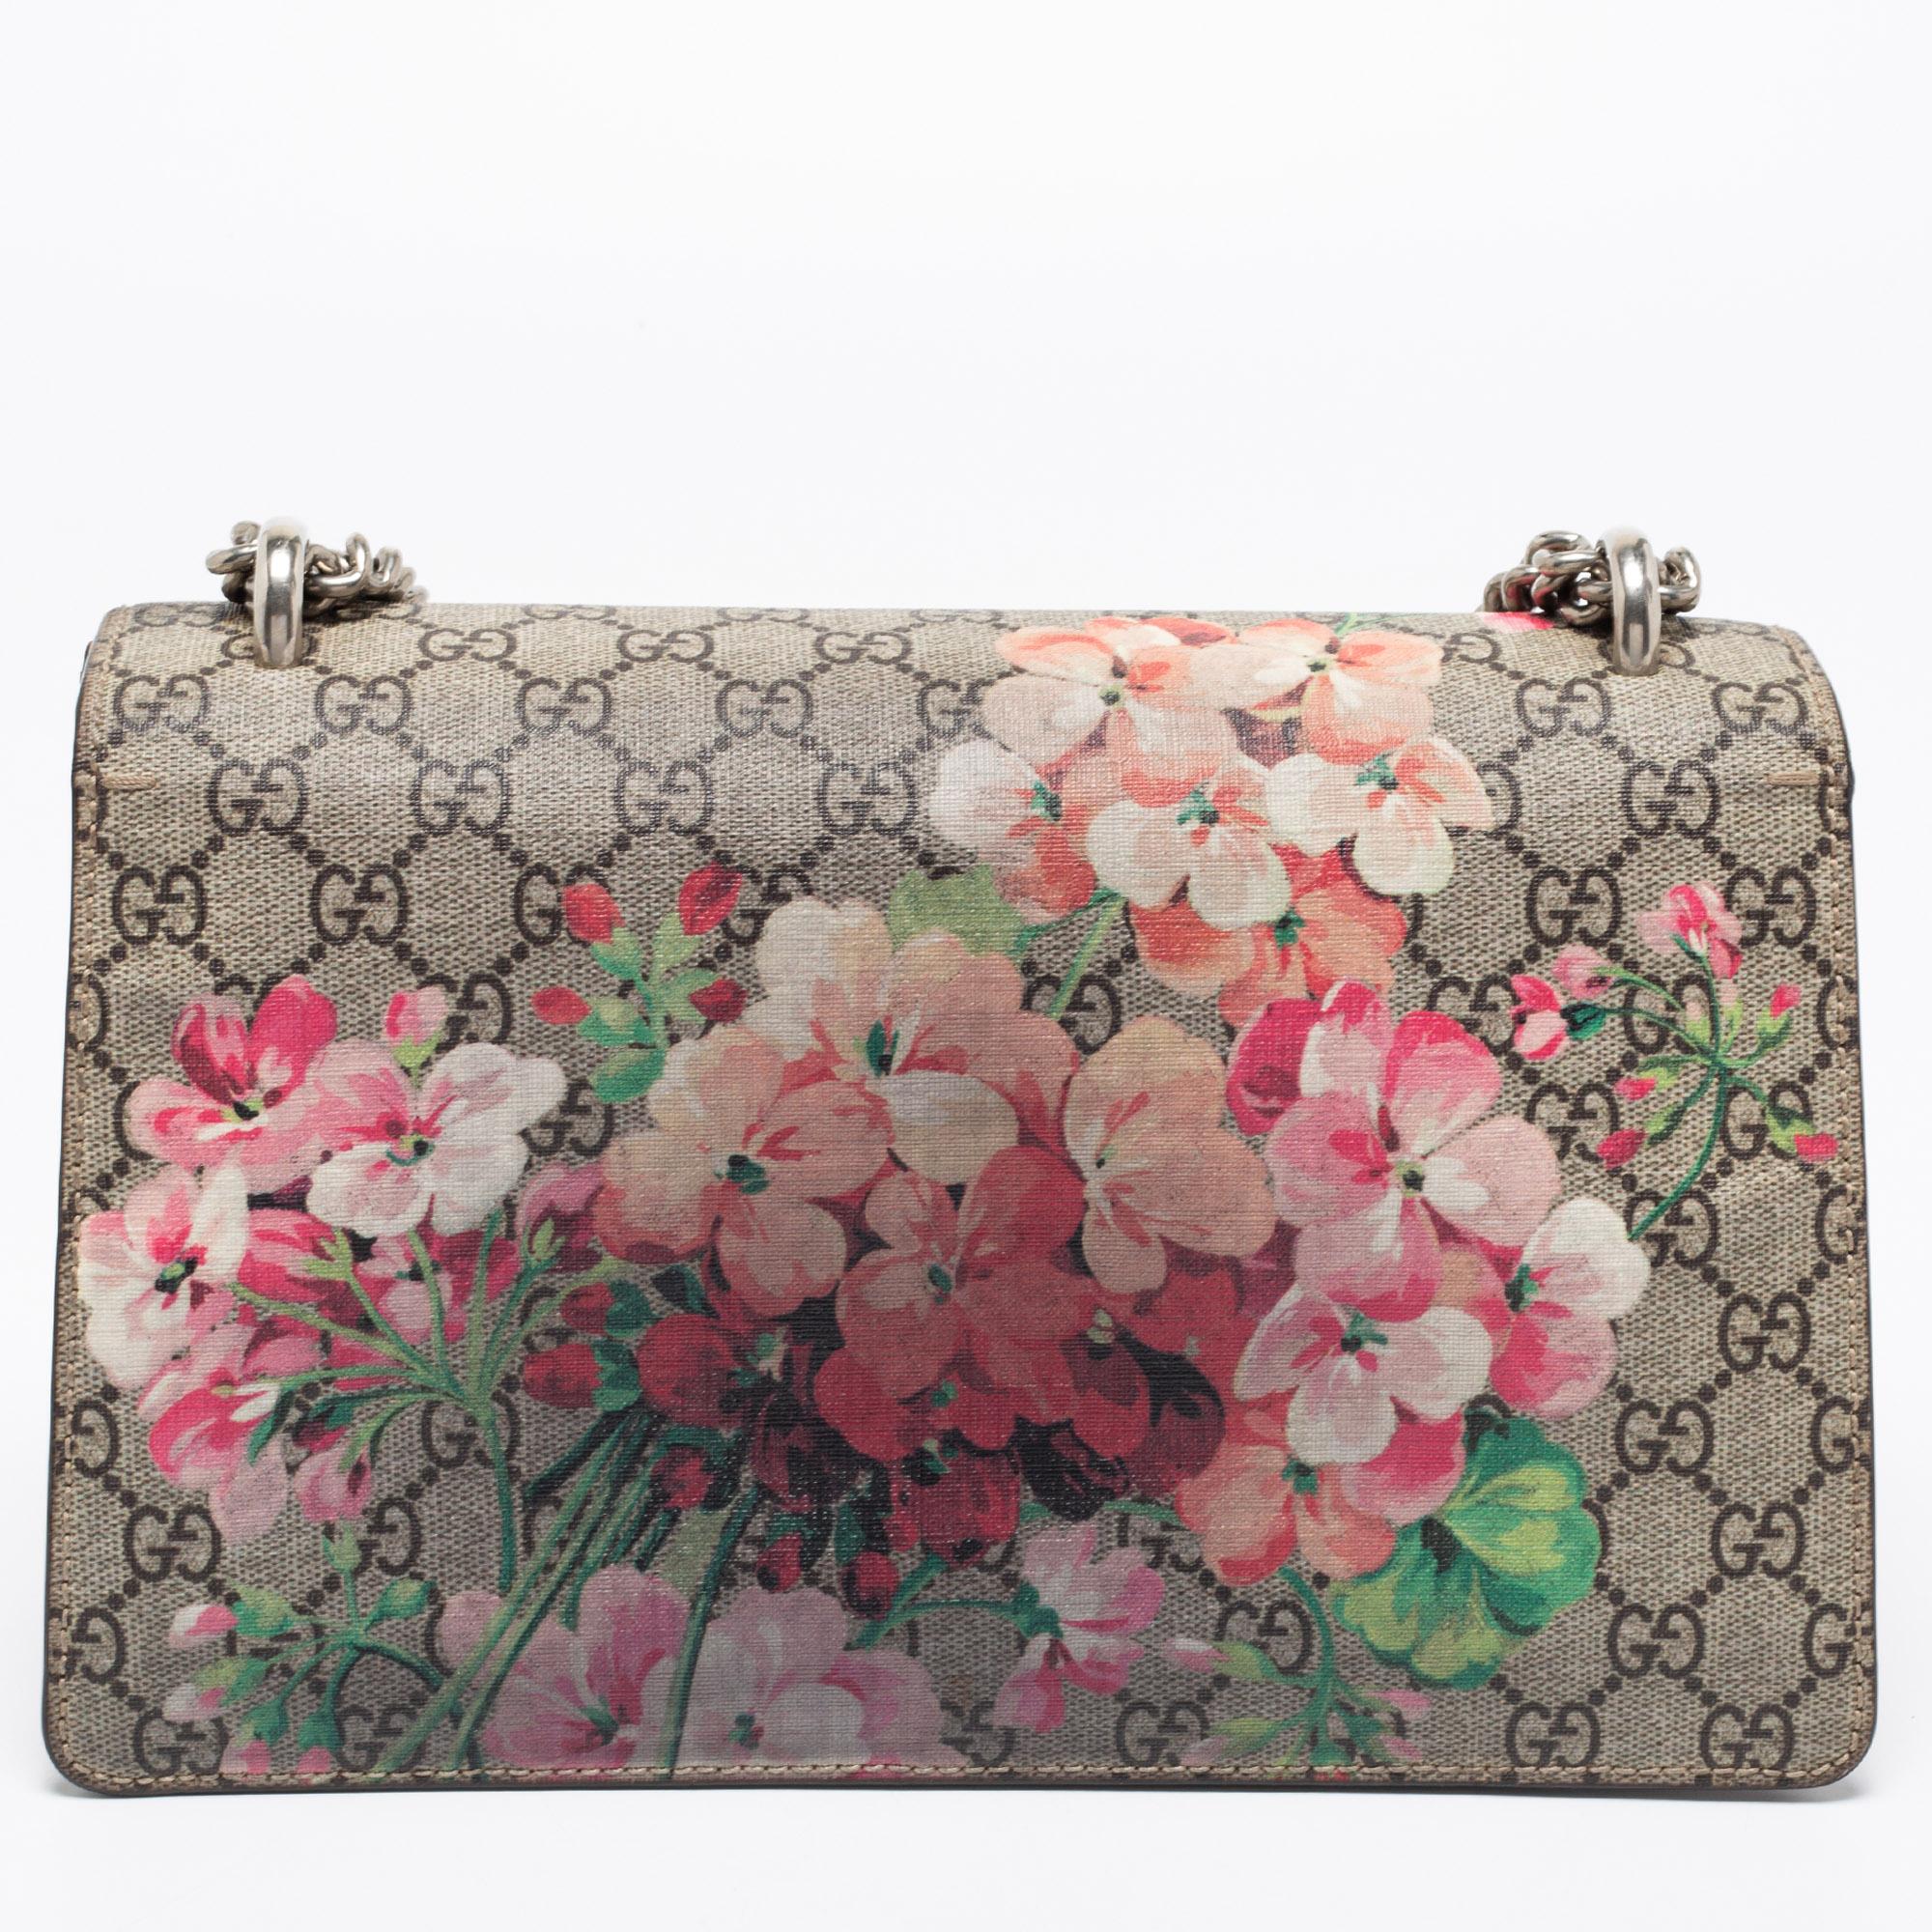 This Gucci Dionysus bag is beautifully crafted from Blooms-printed GG canvas and leather. The flap carries tiger heads with reference to the Greek god, Dionysus, and it secures a functional interior sized to dutifully hold your essentials. The bag